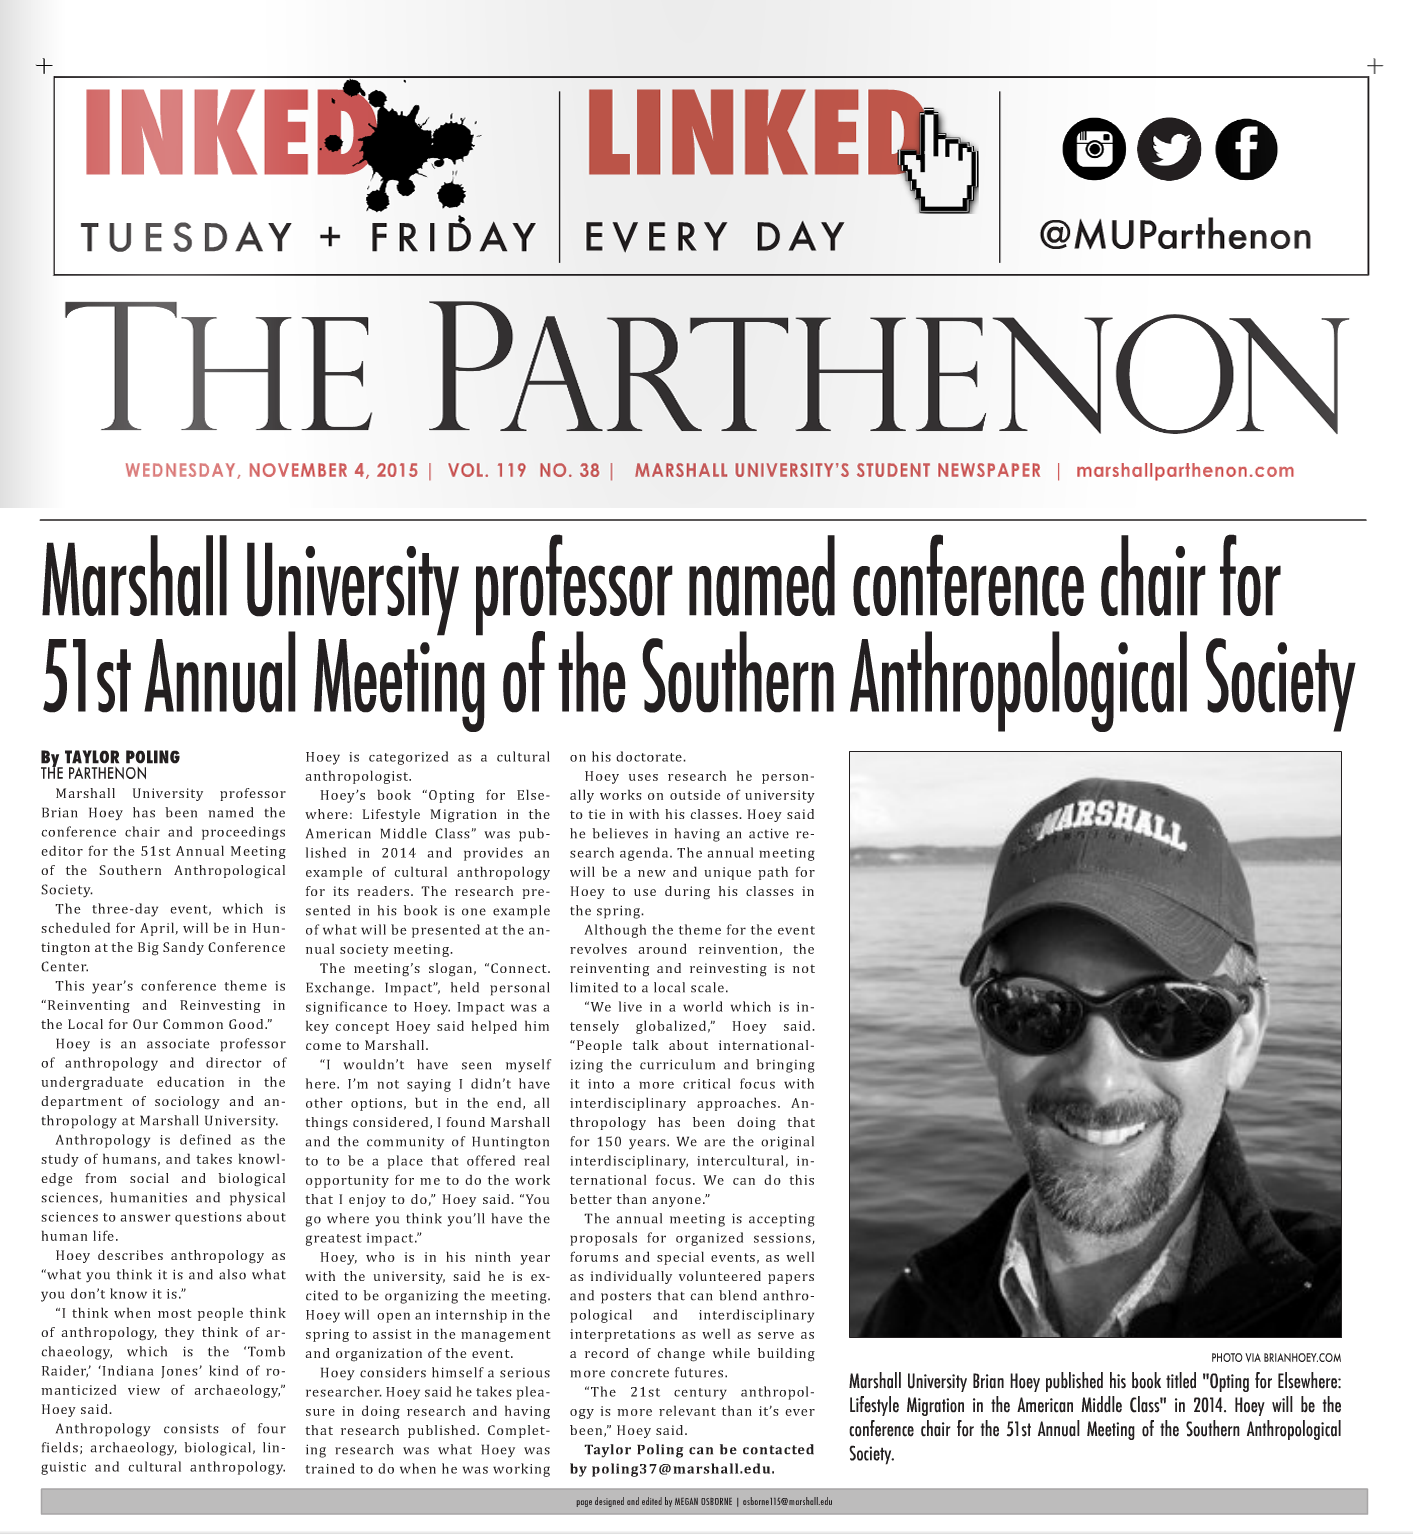 Parthenon article on Dr. Hoey’s Position as Conference Chair for SAS 2016